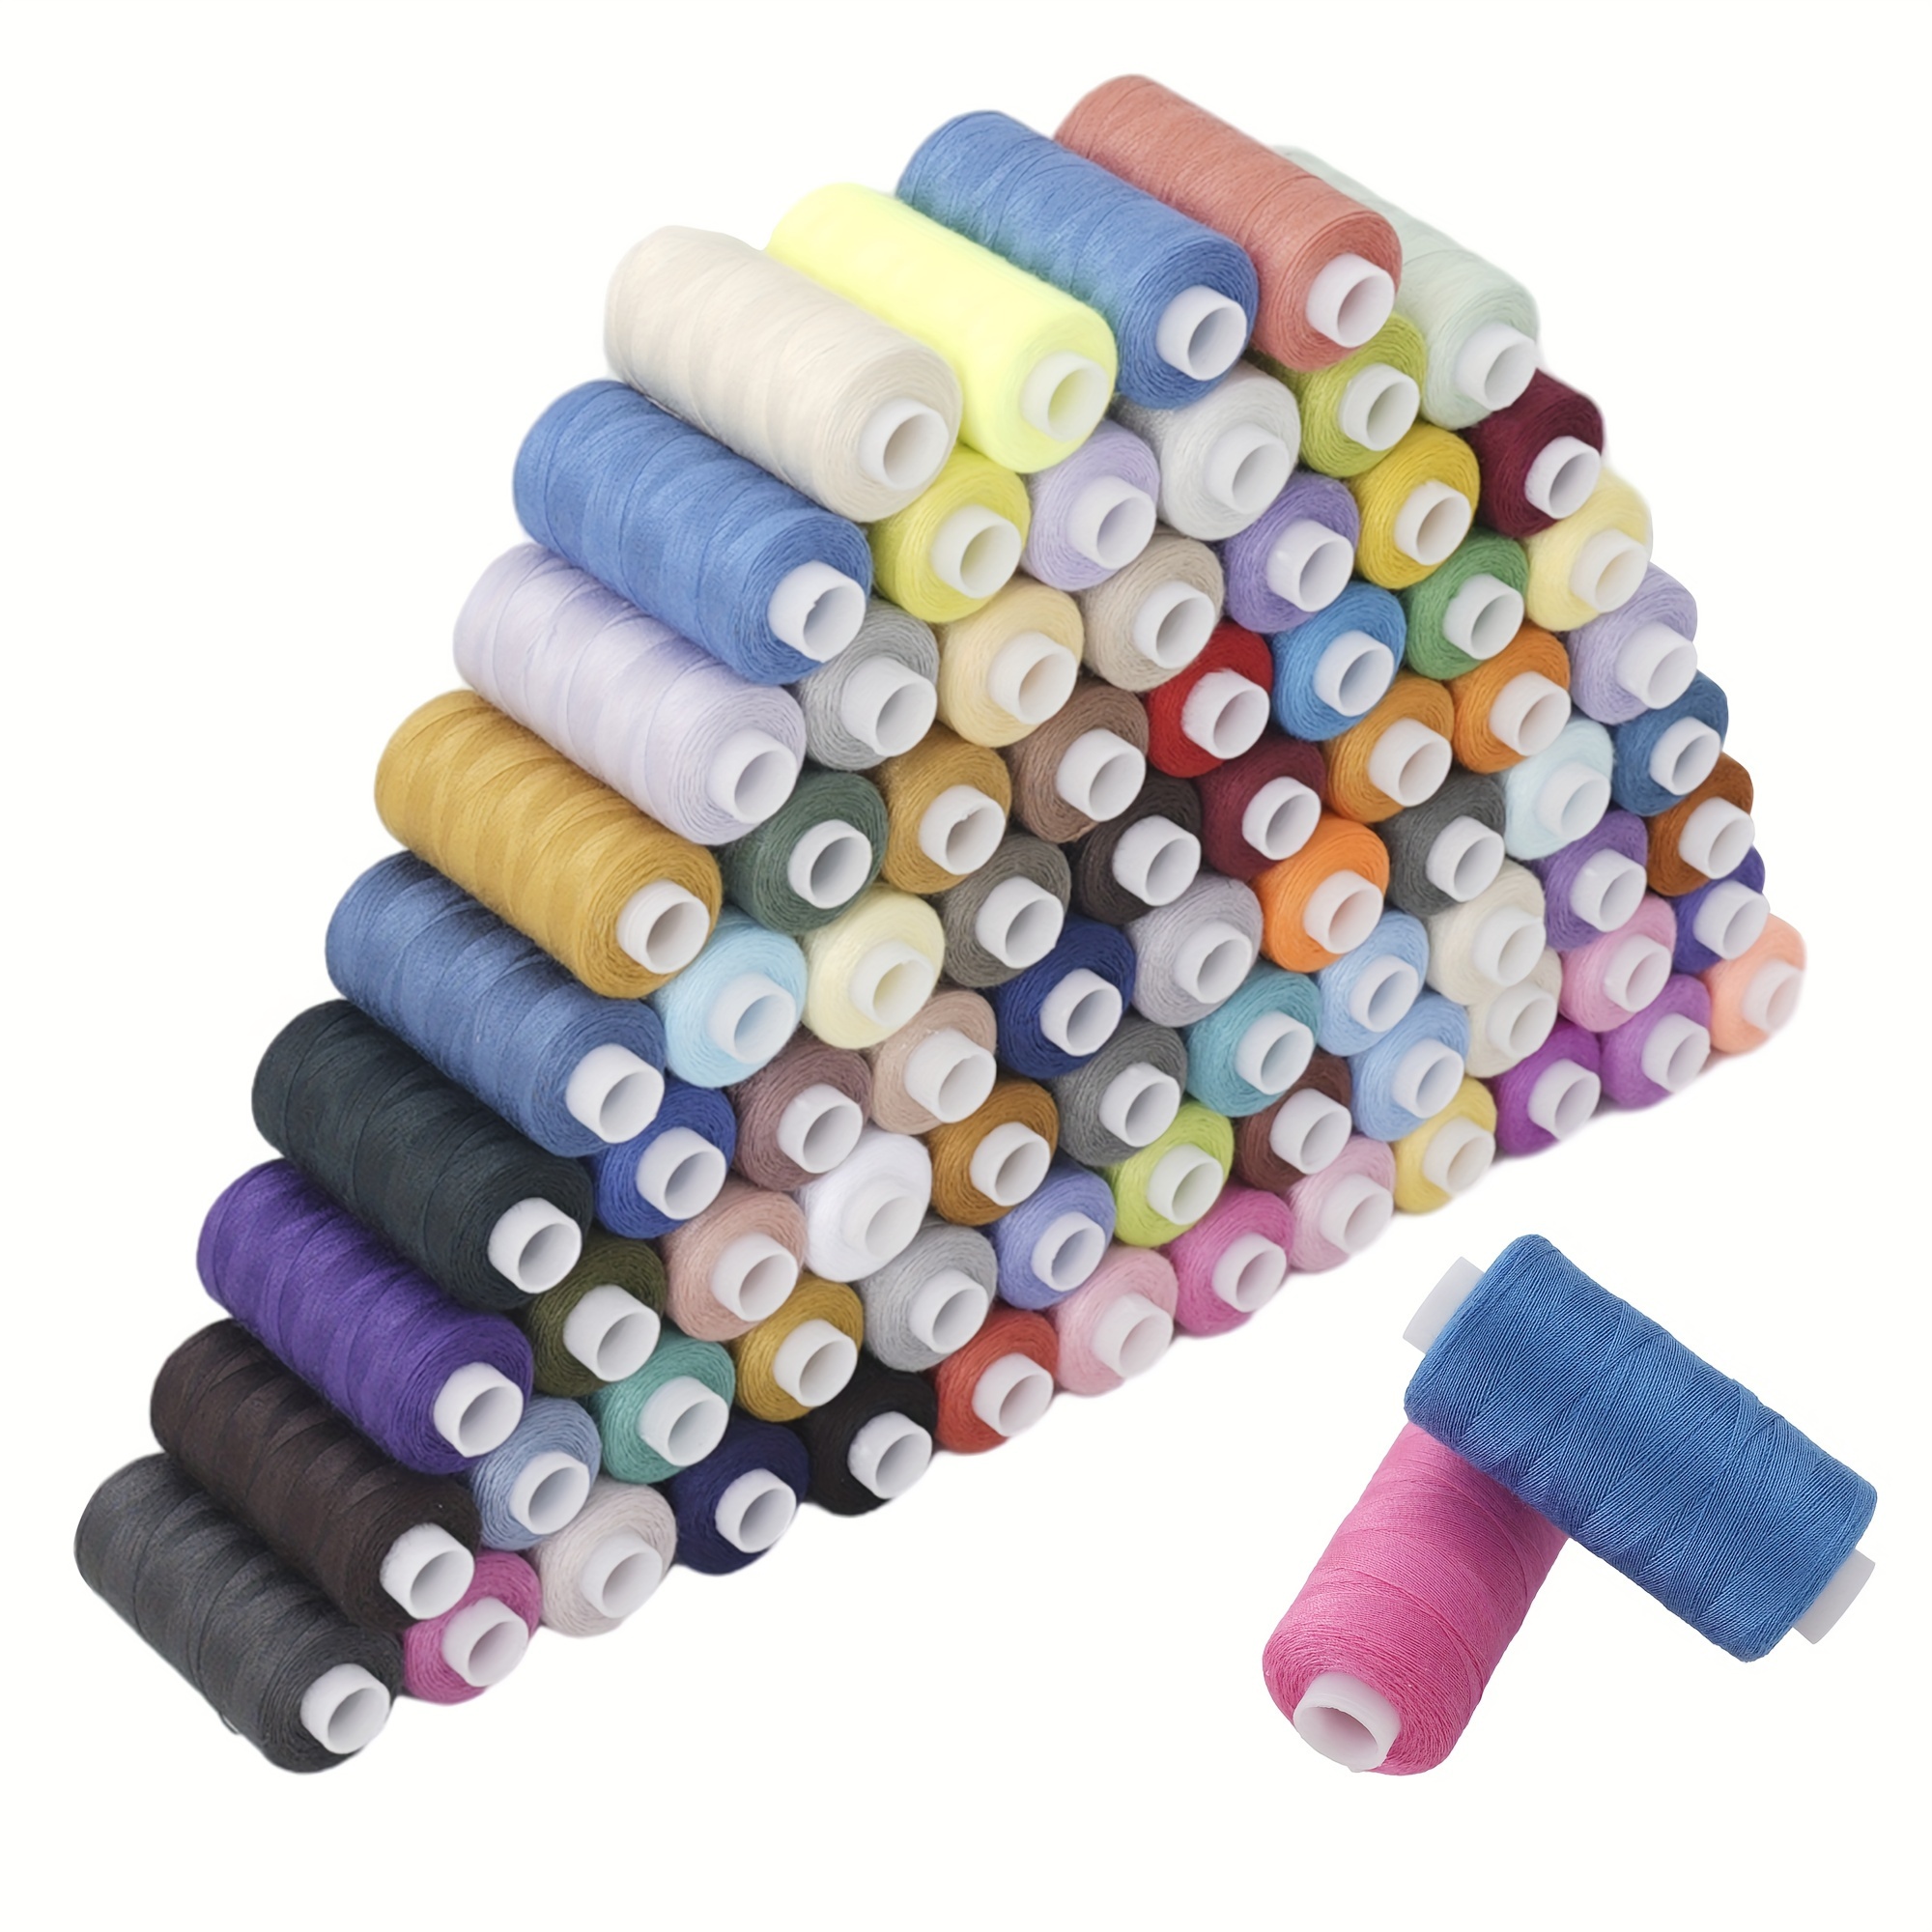 

80colors Sewing Quilting Thread Set 400 Yards Per Spool For Sewing Machine Use